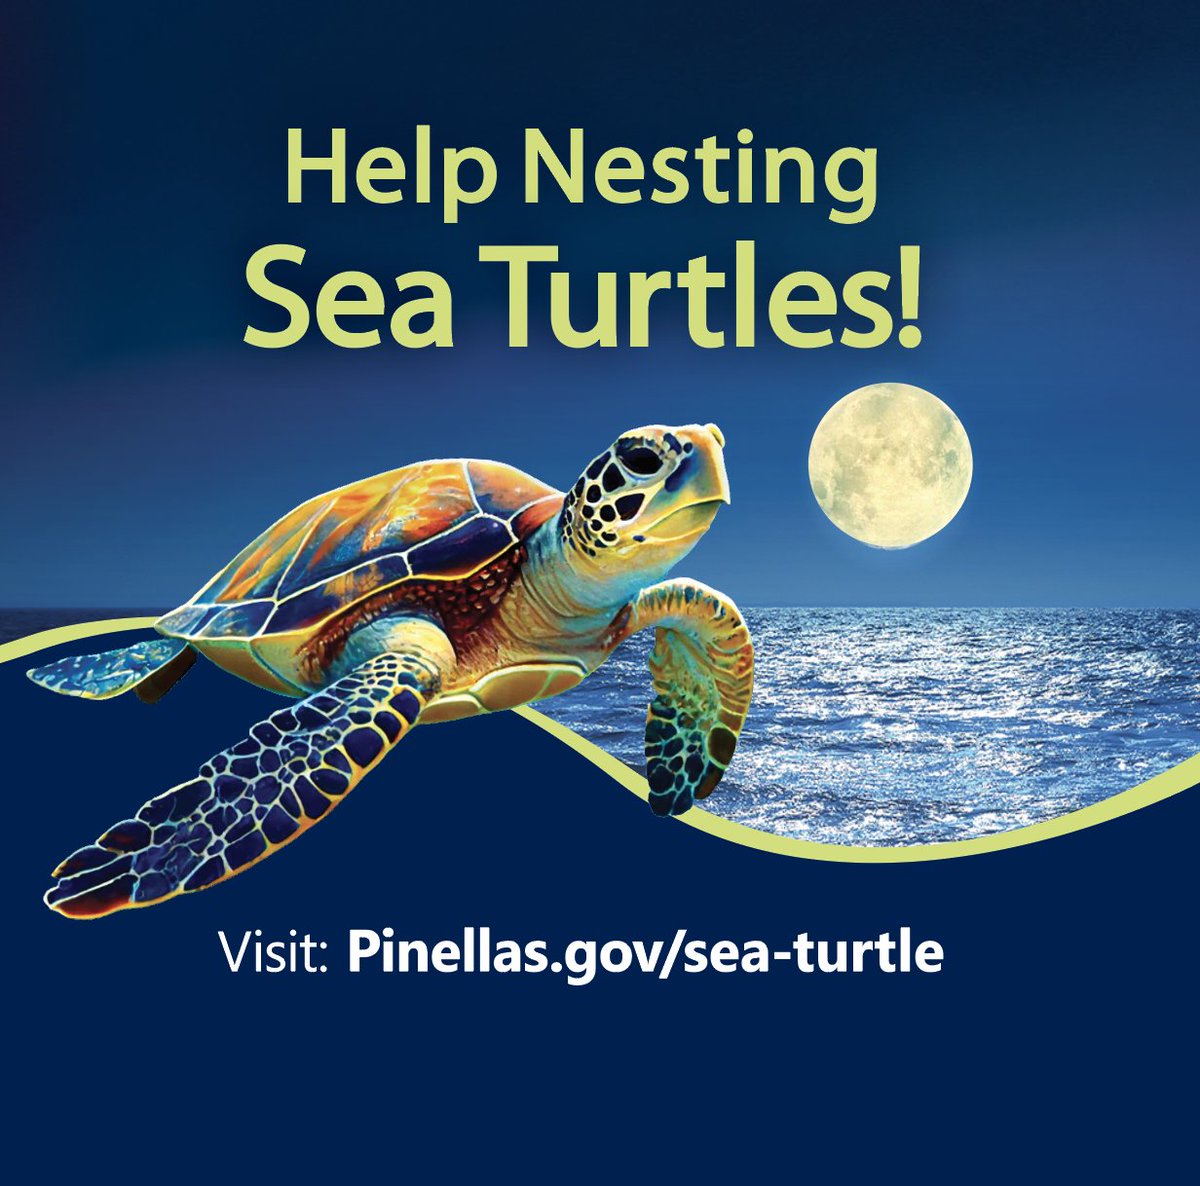 Spread the word and help protect our #seaturtles. Lights shining toward the beach can disorient them, and sand castles, beach equipment and trash left behind can trap them. Keep the beach dark and smooth to give them an easier time. #KeepTheBeachClean #SaveTheTurtles #PCPW